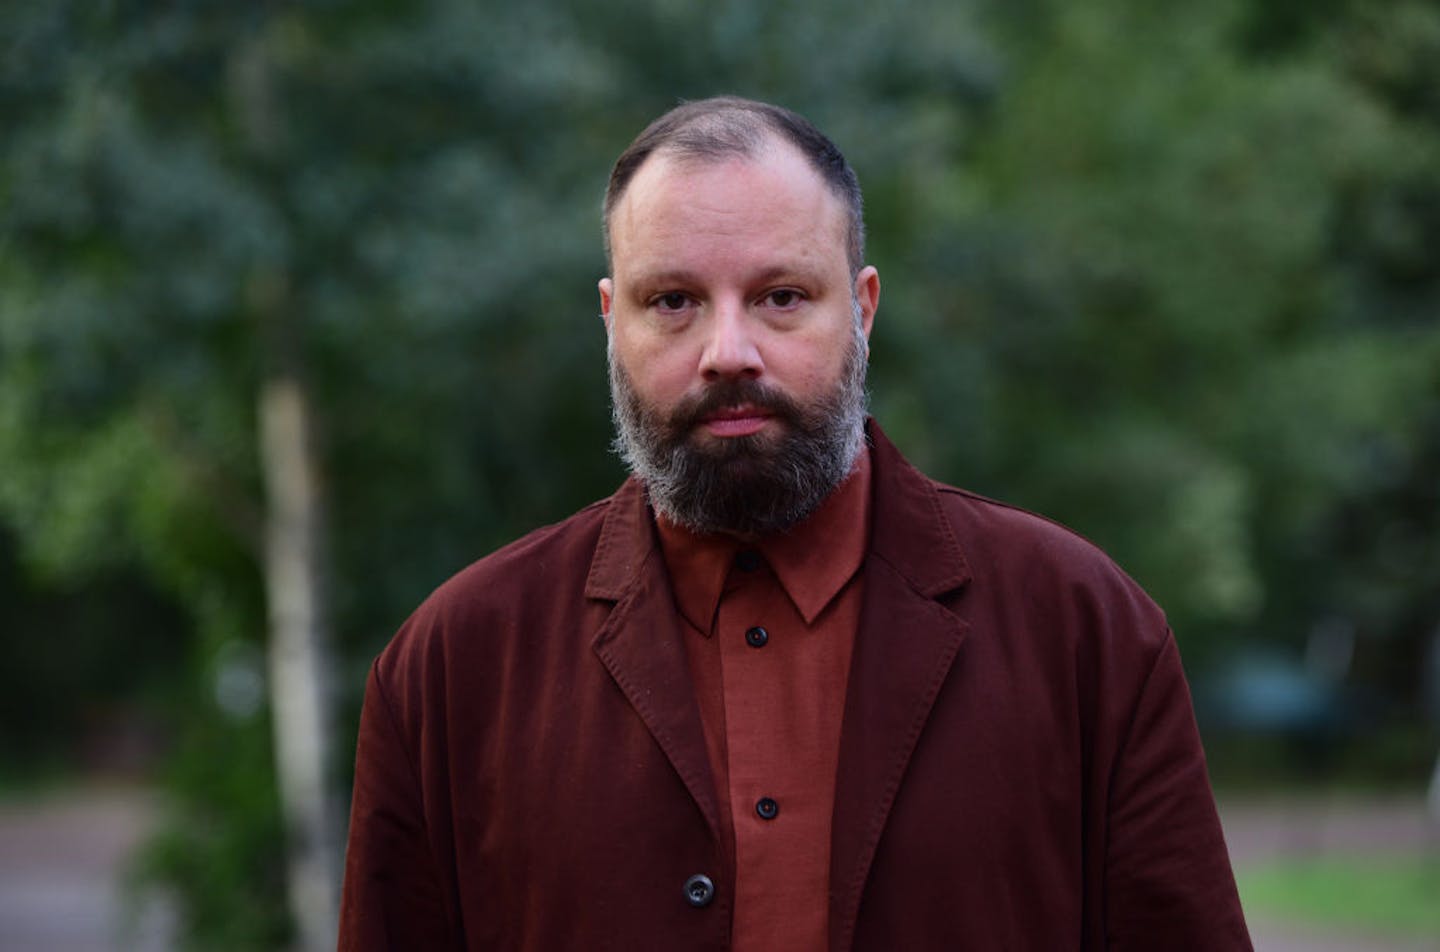 Balding middle-aged man with beard and red jacket.